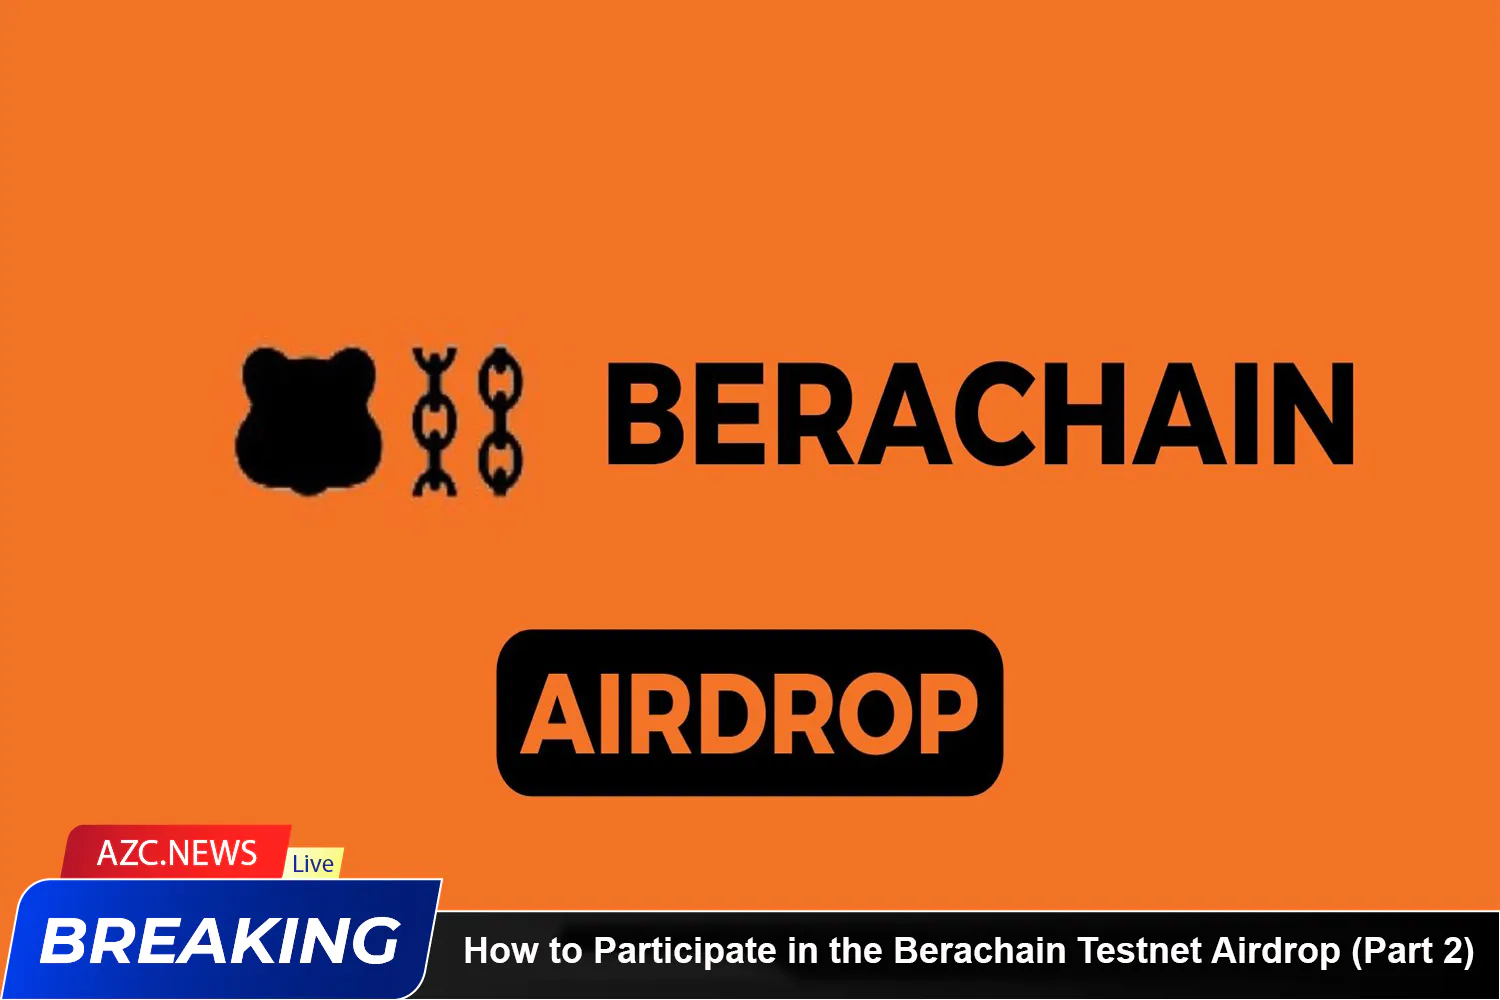 How To Participate In The Berachain Testnet Airdrop (part 2) Azc